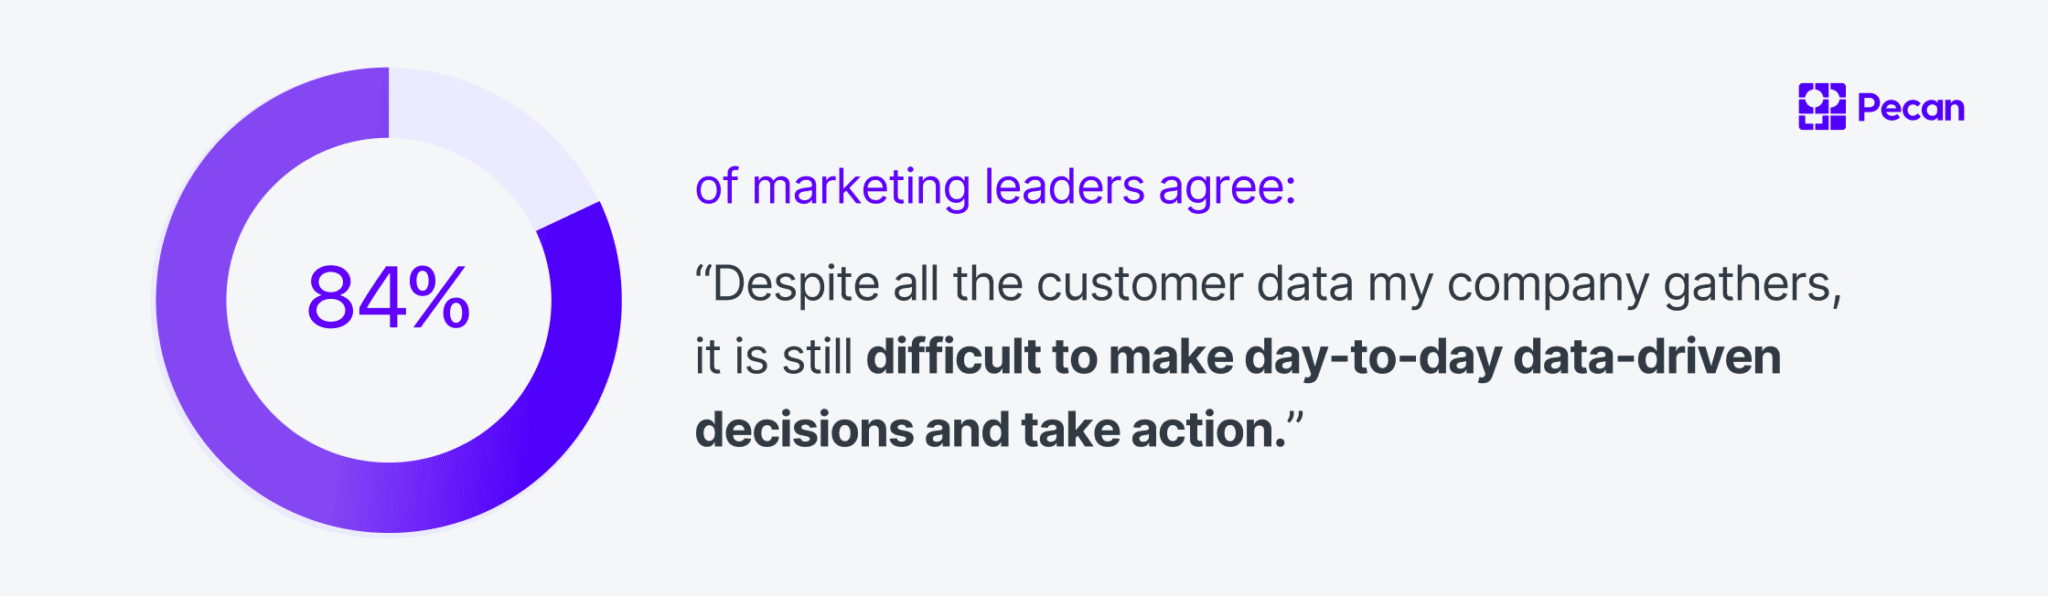 84% of marketing leaders agree it's difficult to make day-to-day decisions and take action